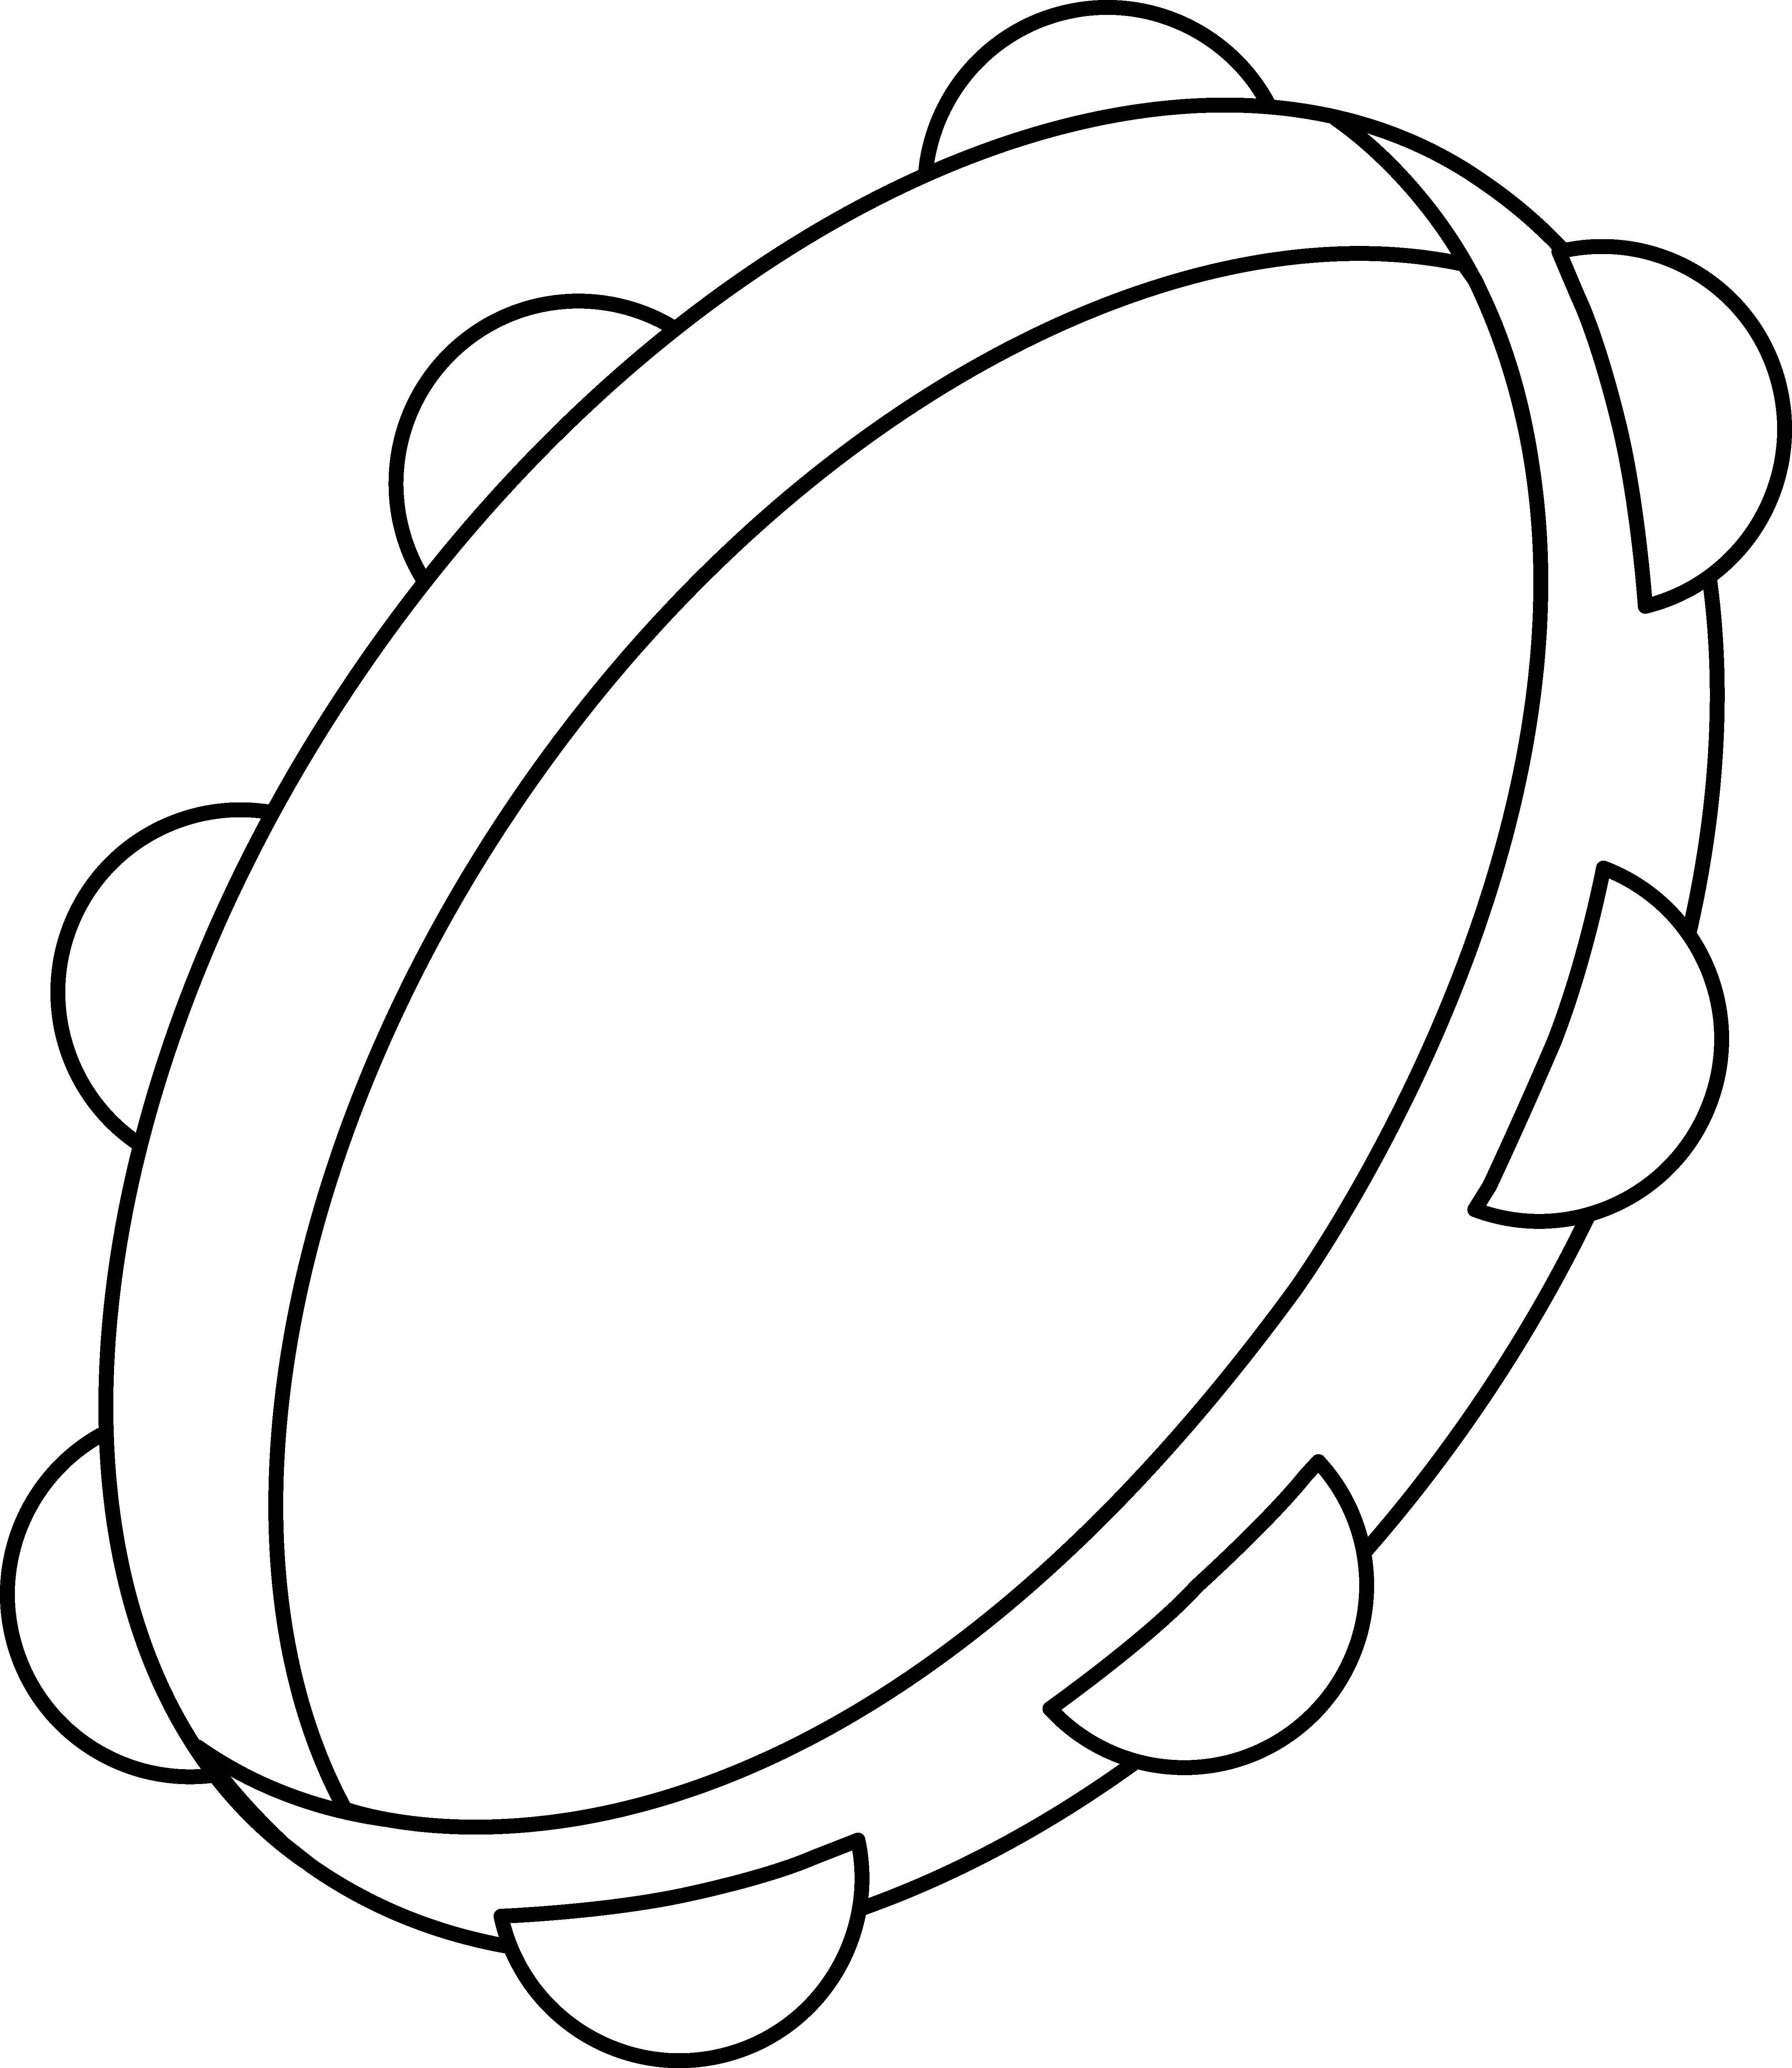 Tambourine clip art free coloring pages | Coloring Pages